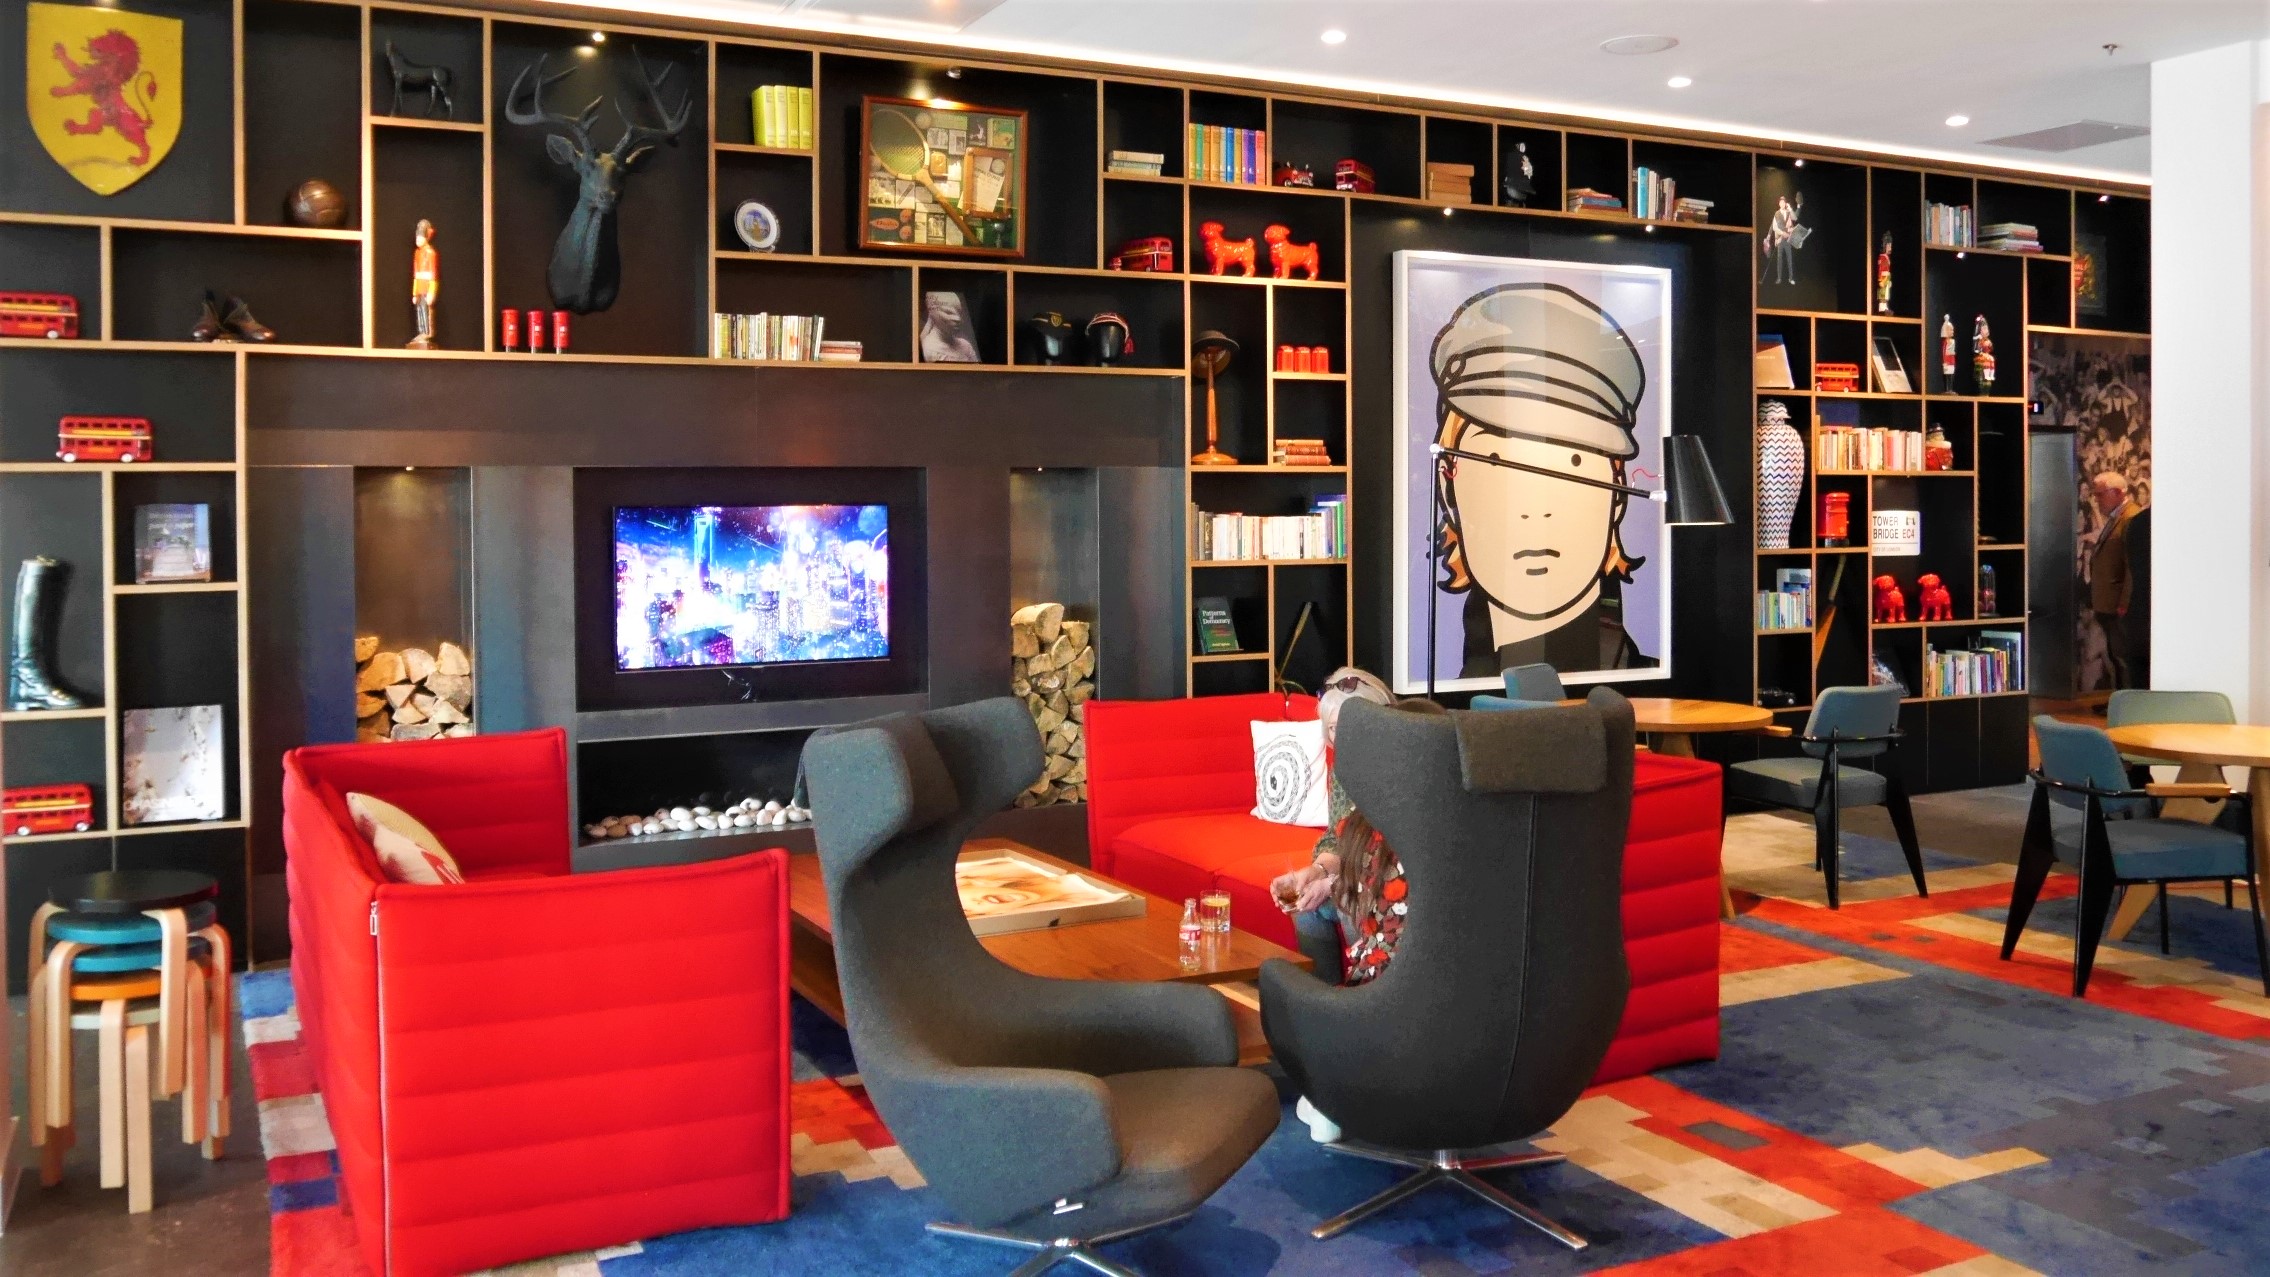 citizenM tower of london lobby 2